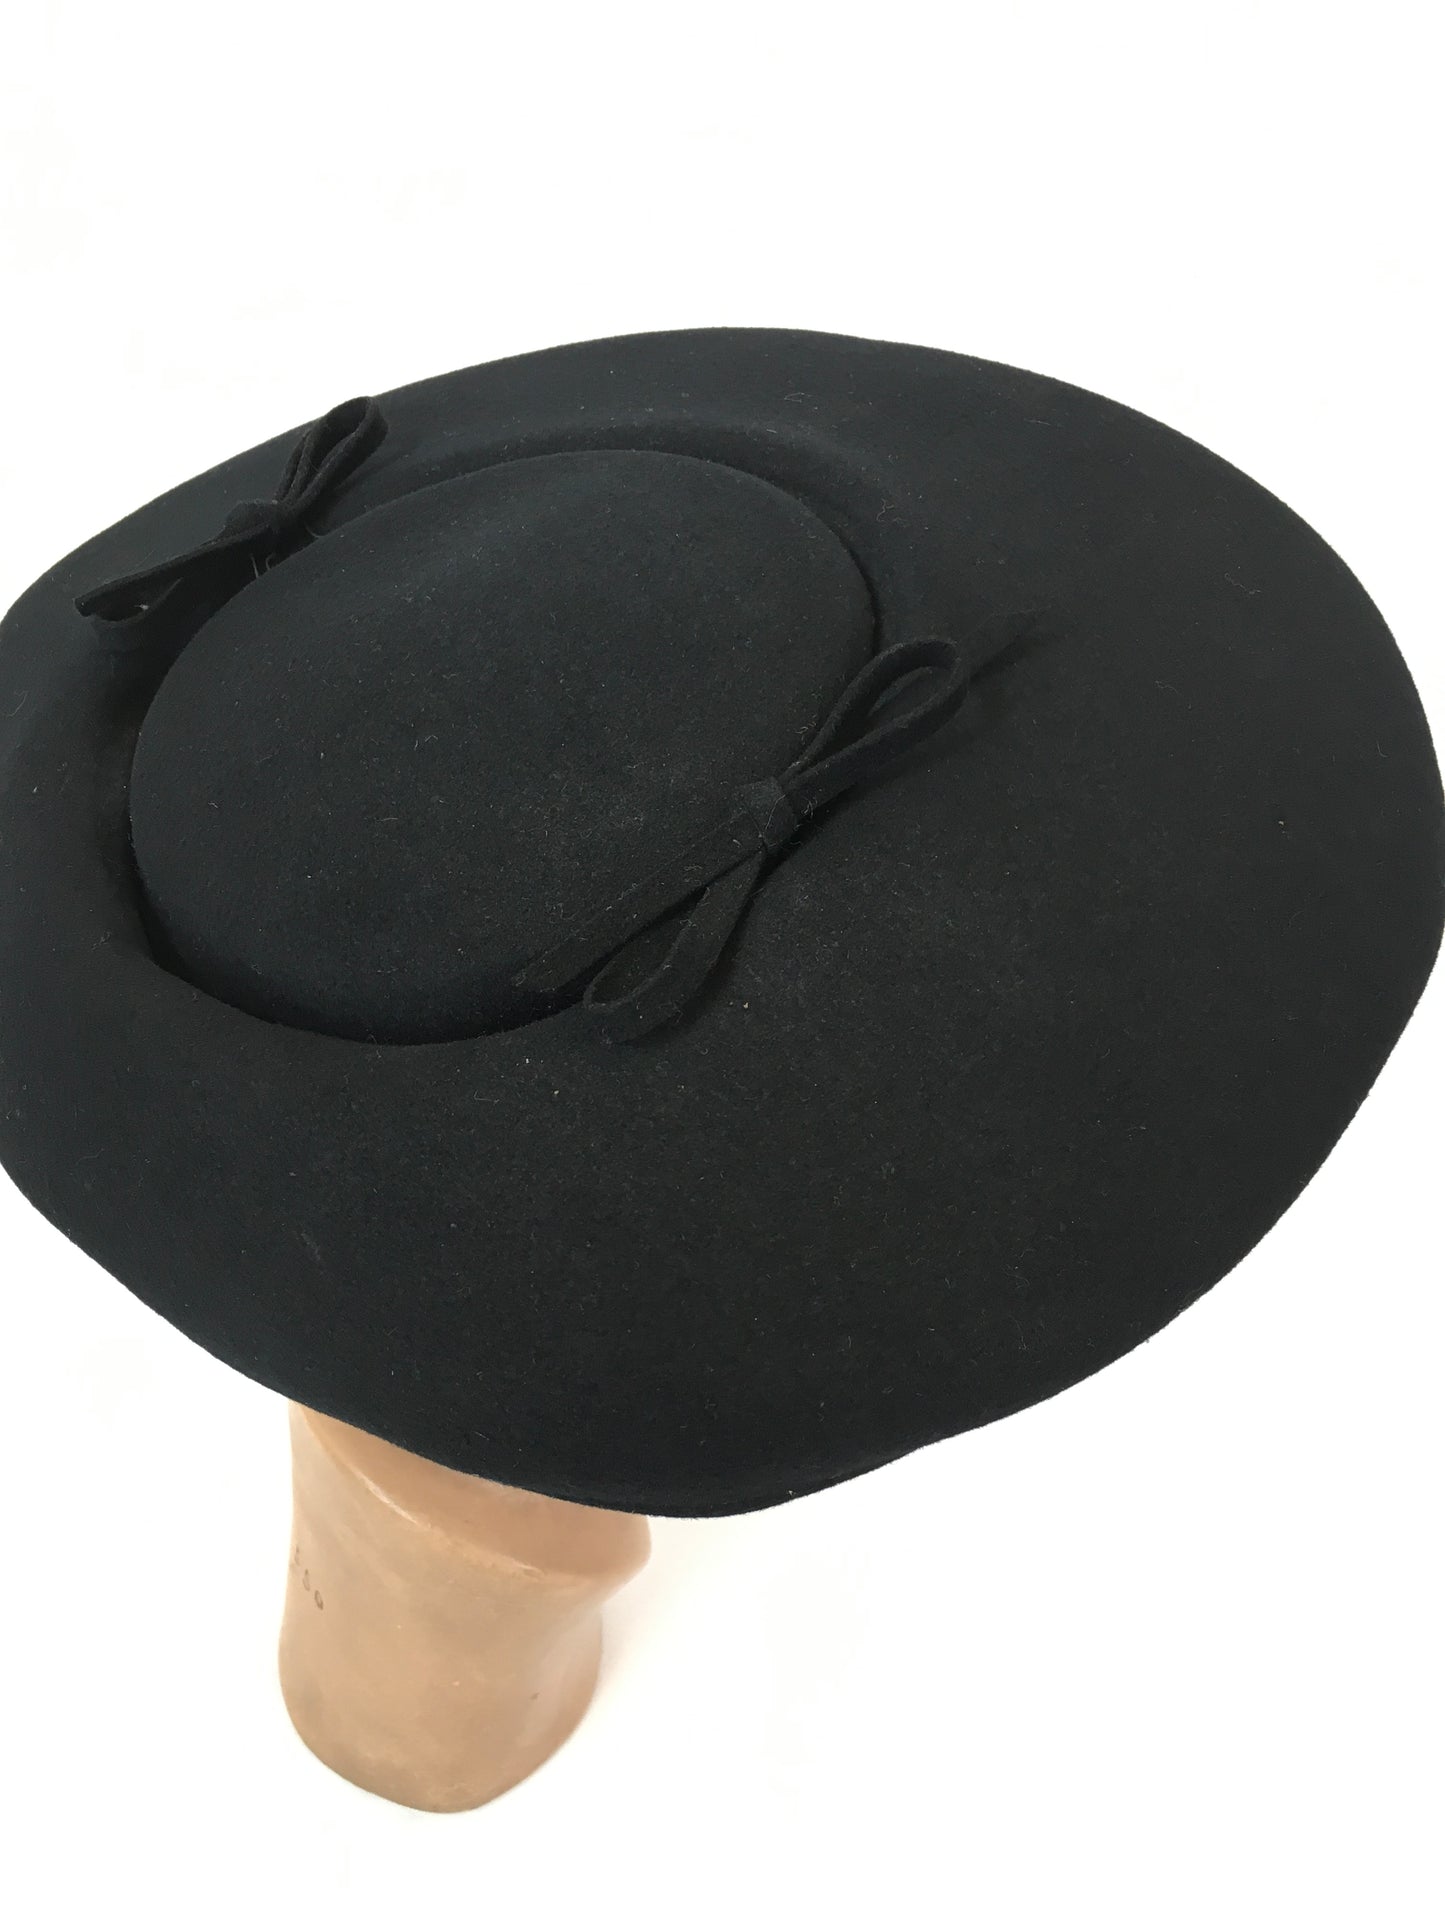 Original 1950’s Black Platter Hat - Stunning New Look Style Shape with Bow Adornments